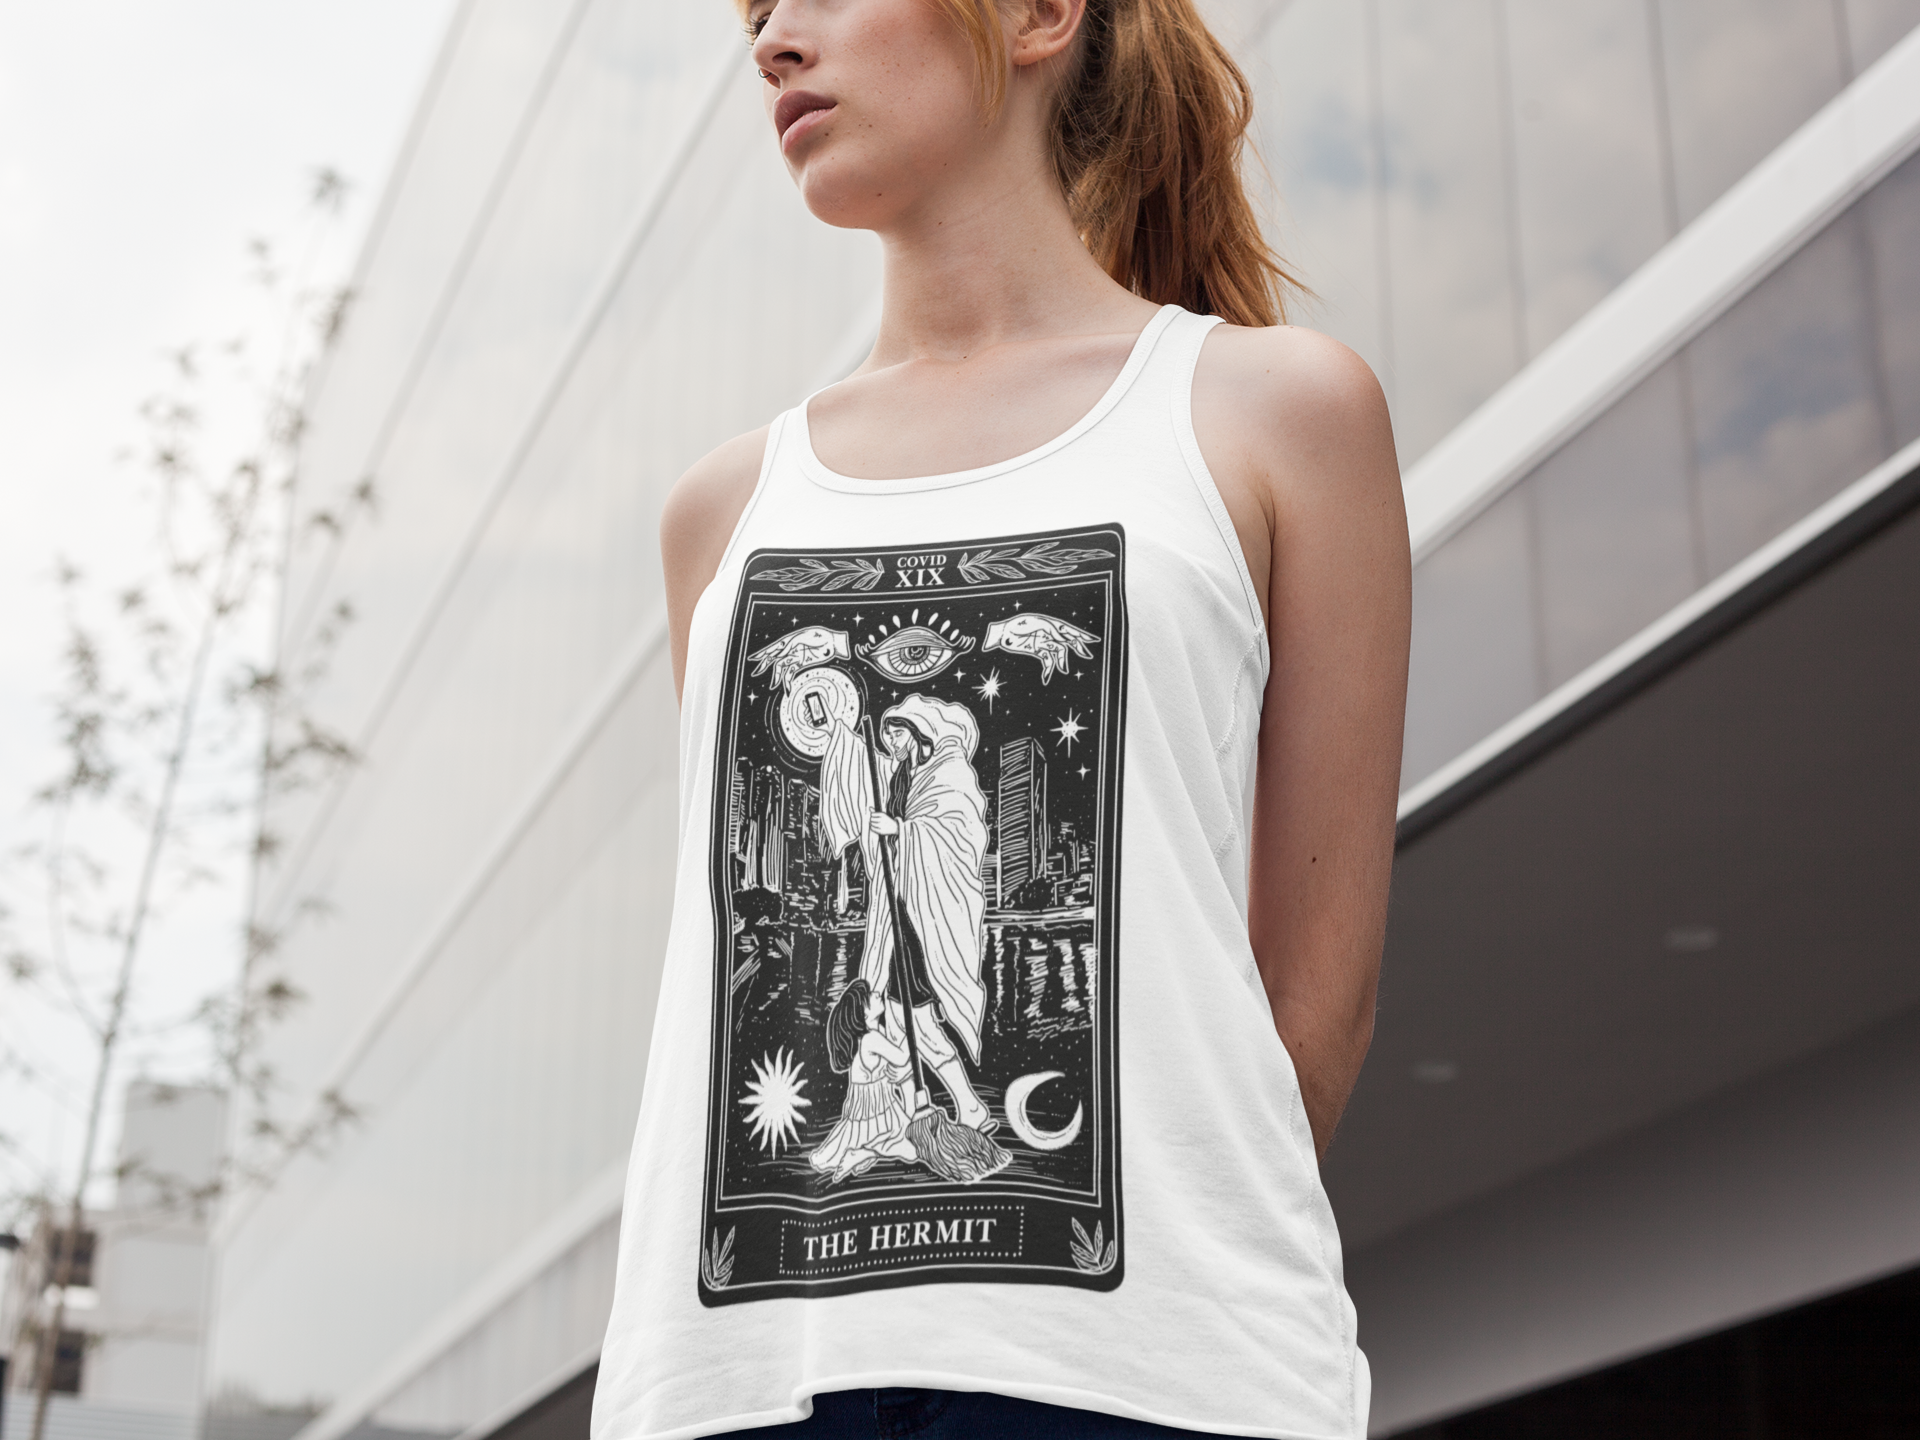 « THE HERMIT » WOMEN'S SLOUCHY or RACERBACK TANK